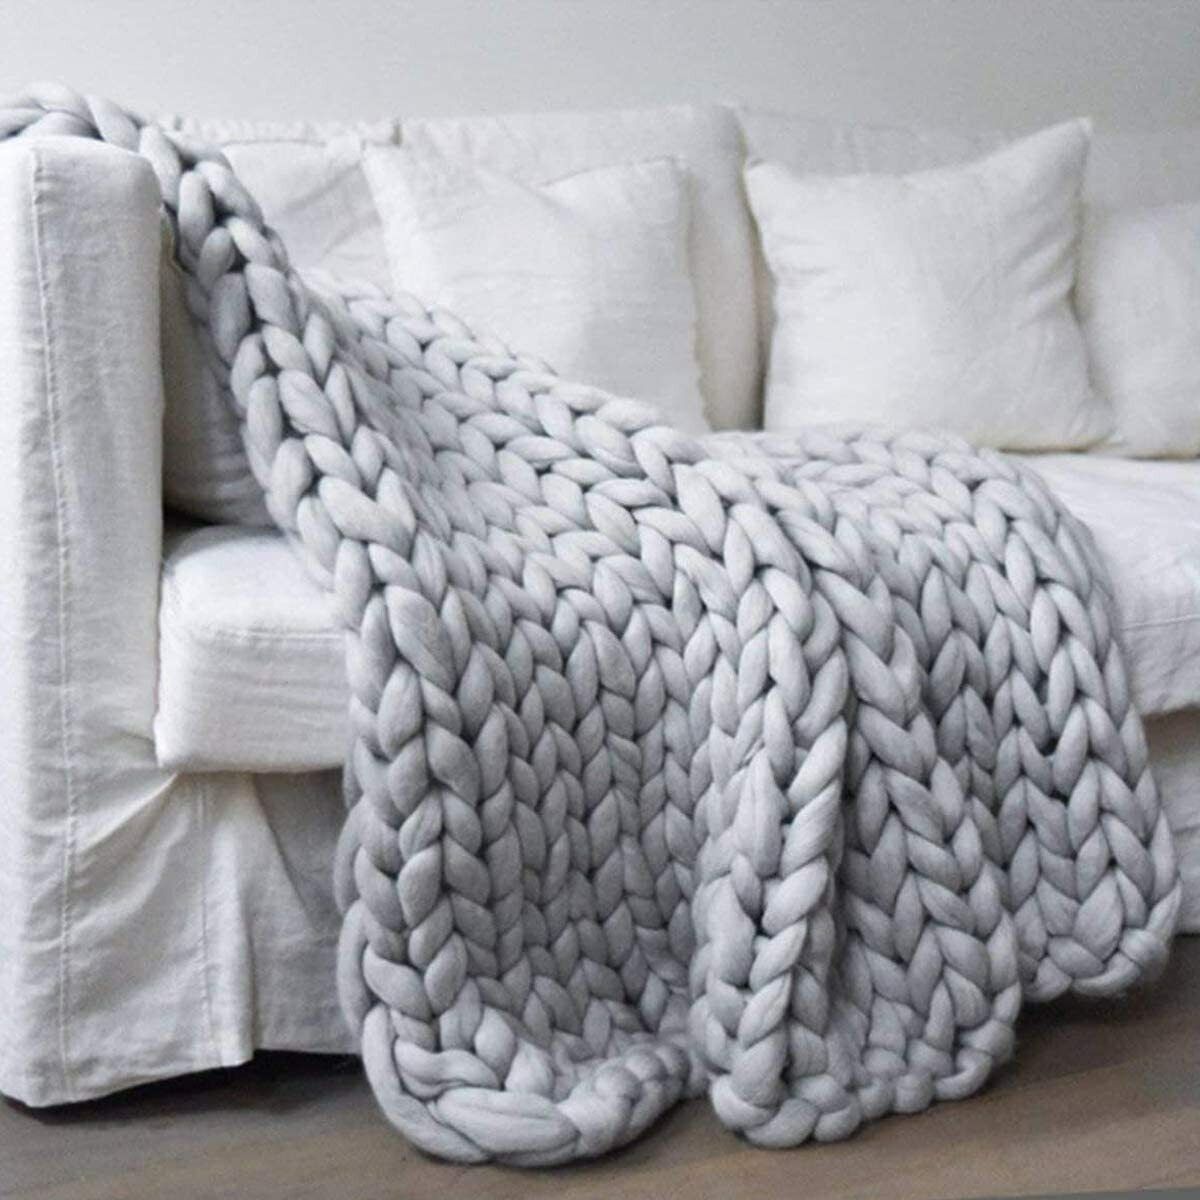 Chunky Handmade Knitted Blanket for Home Decor No Stimulation Warm Soft Cozy